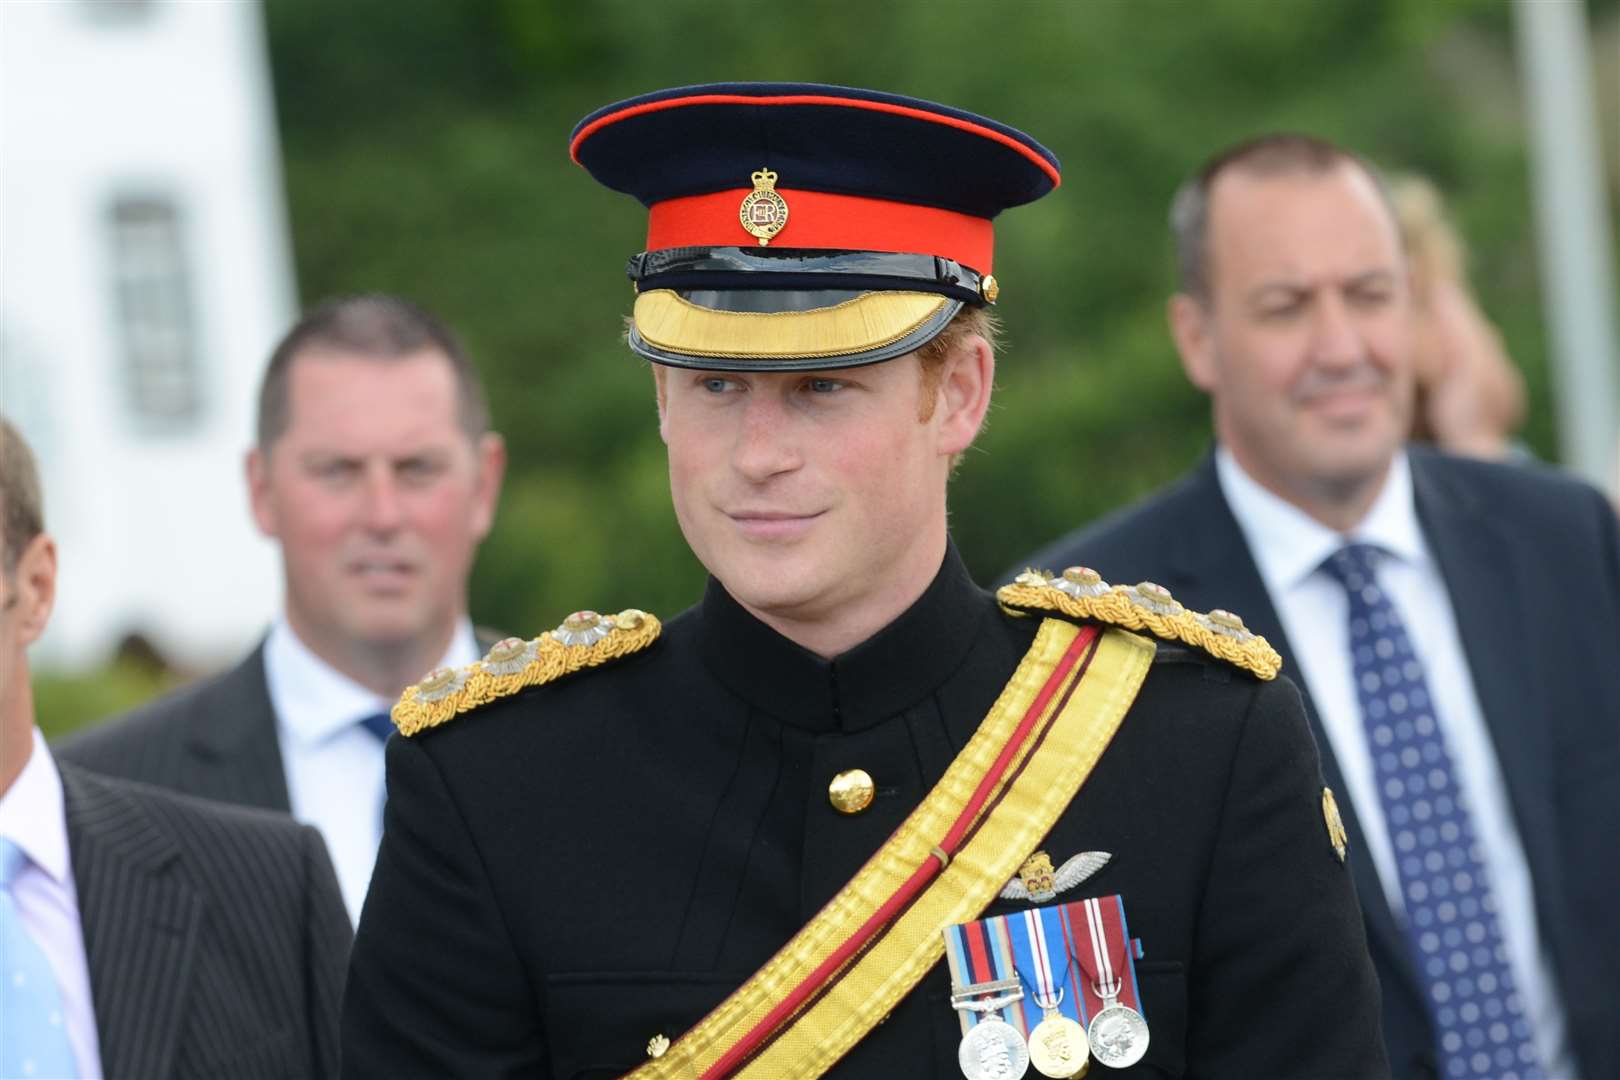 Prince Harry while a serving soldier visiting Folkestone in 2014 to mark the centenary of the start of the First World War